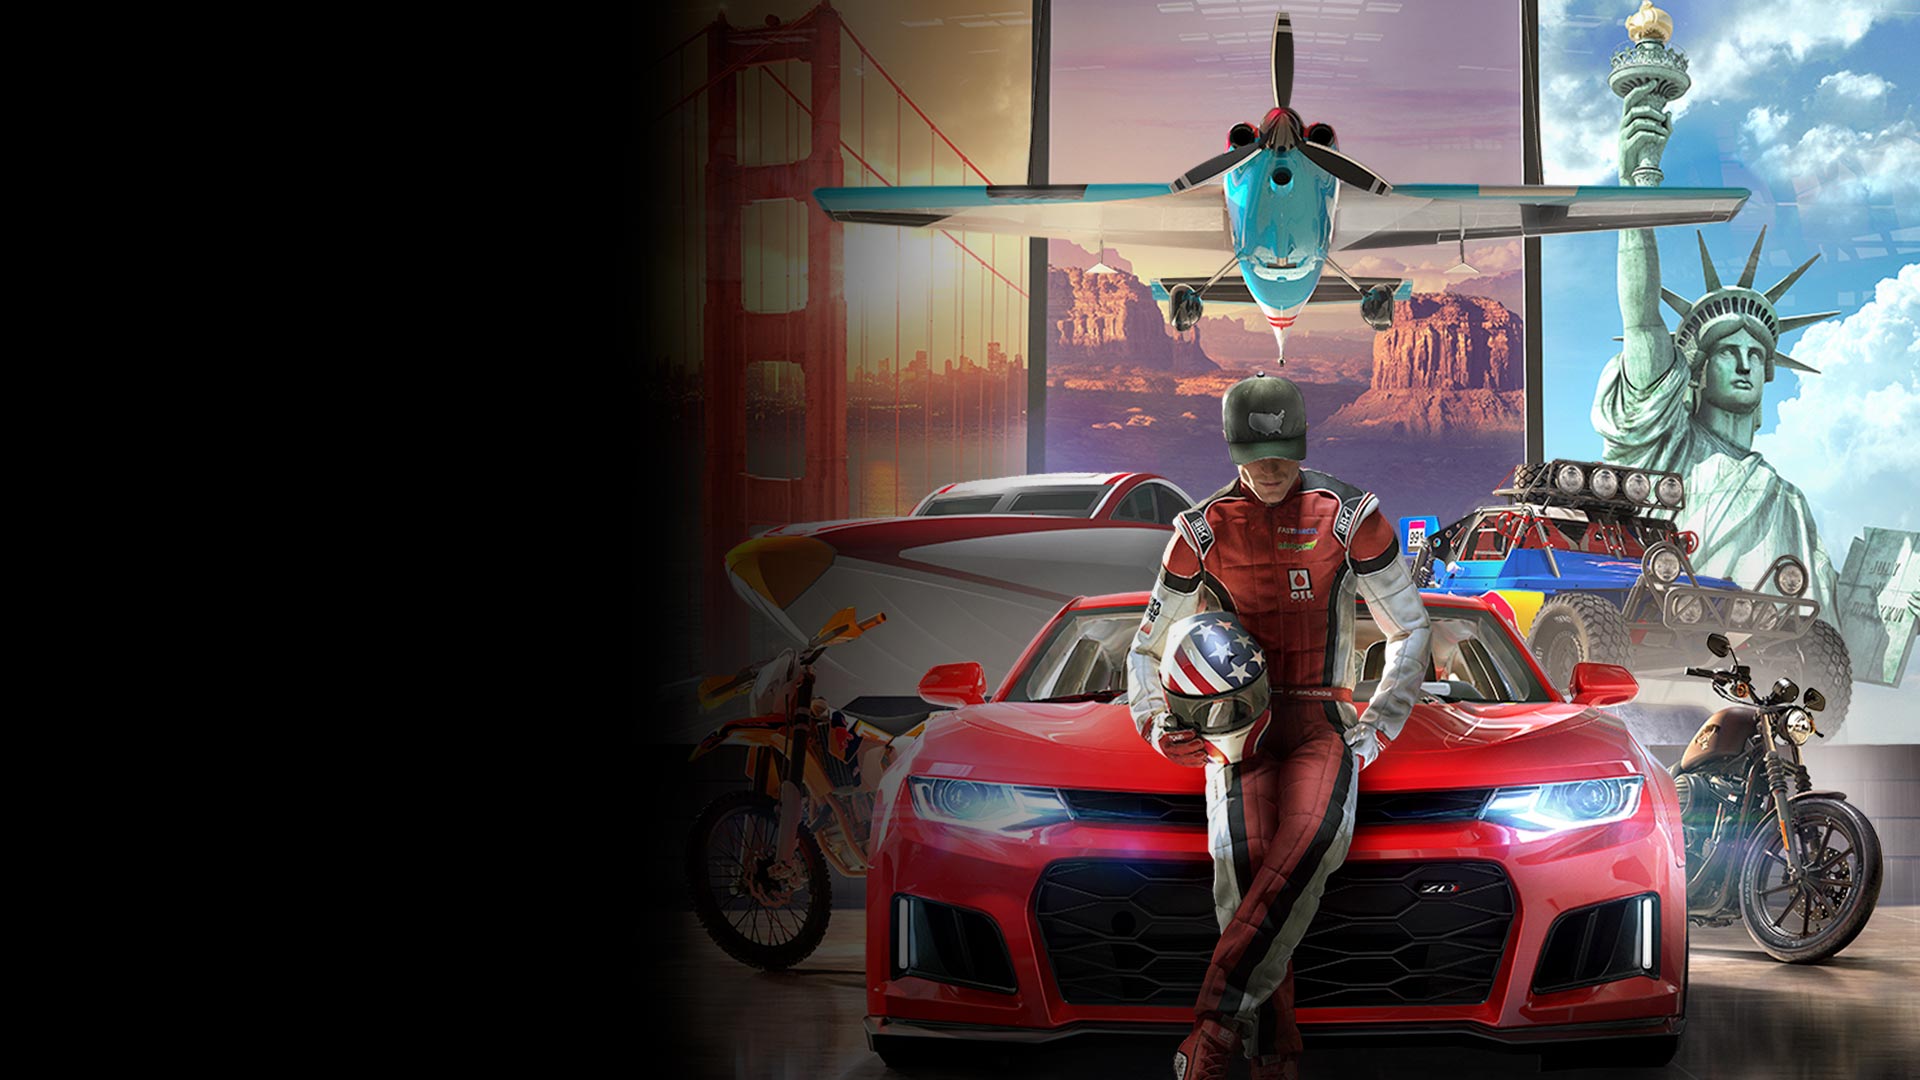 The Crew 2 Gold Edition PC Version Full Game Setup Free Download - EPN